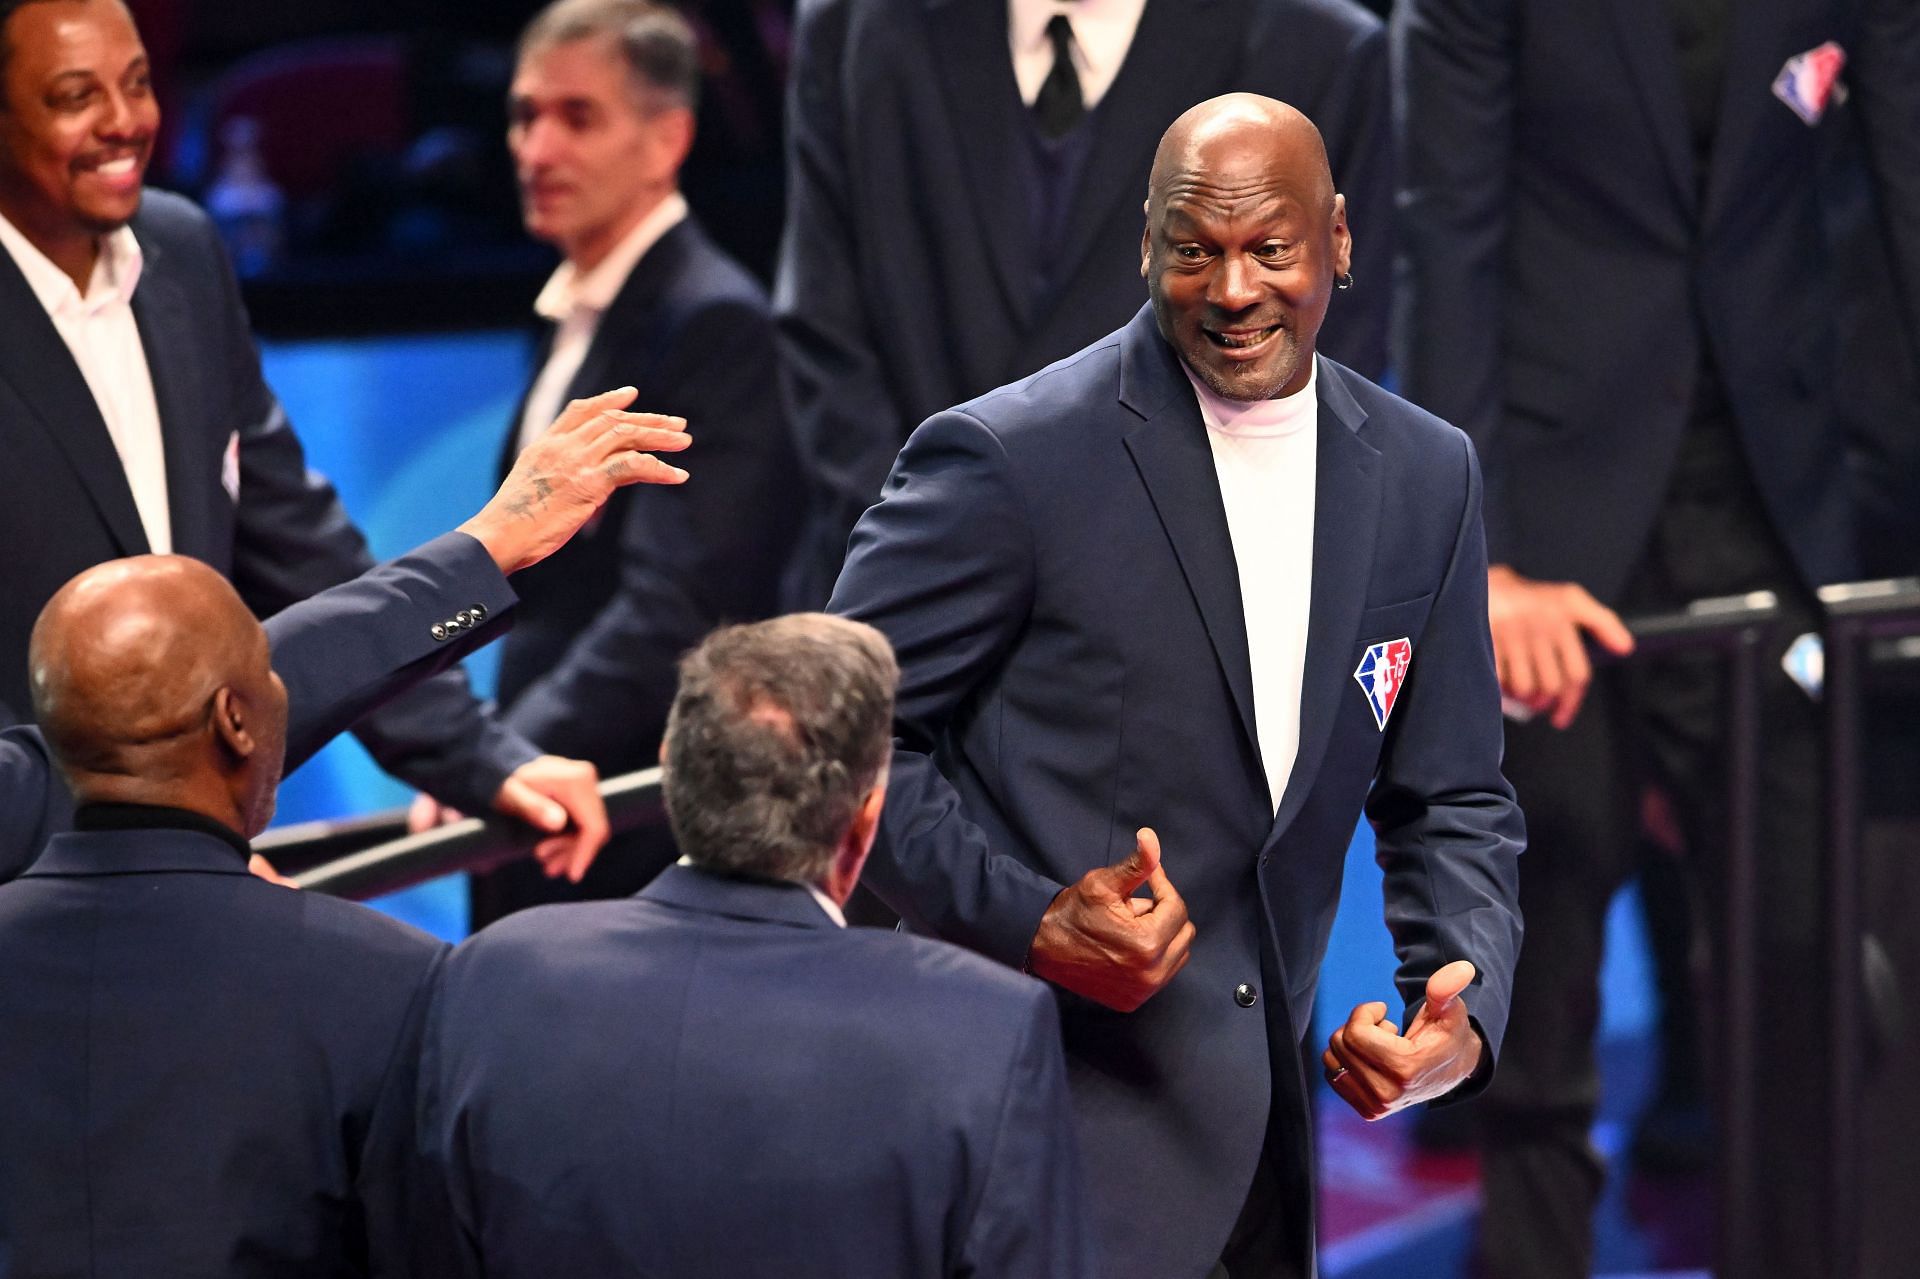 Michael Jordan in attendance at the 2022 NBA All-Star Game